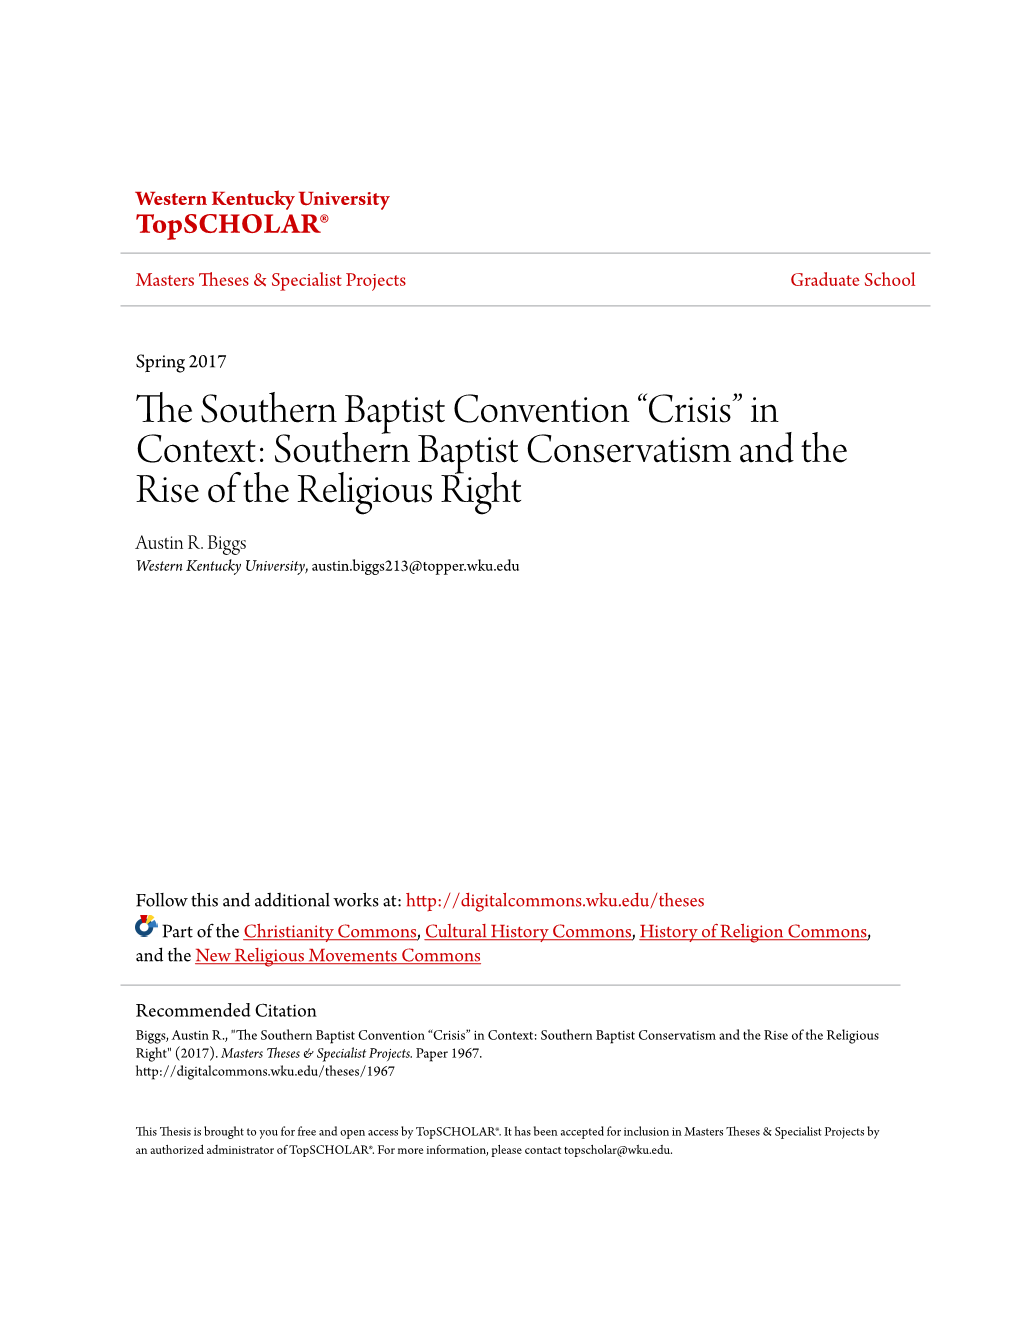 The Southern Baptist Convention “Crisis” in Context: Southern Baptist Conservatism and the Rise of the Religious Right